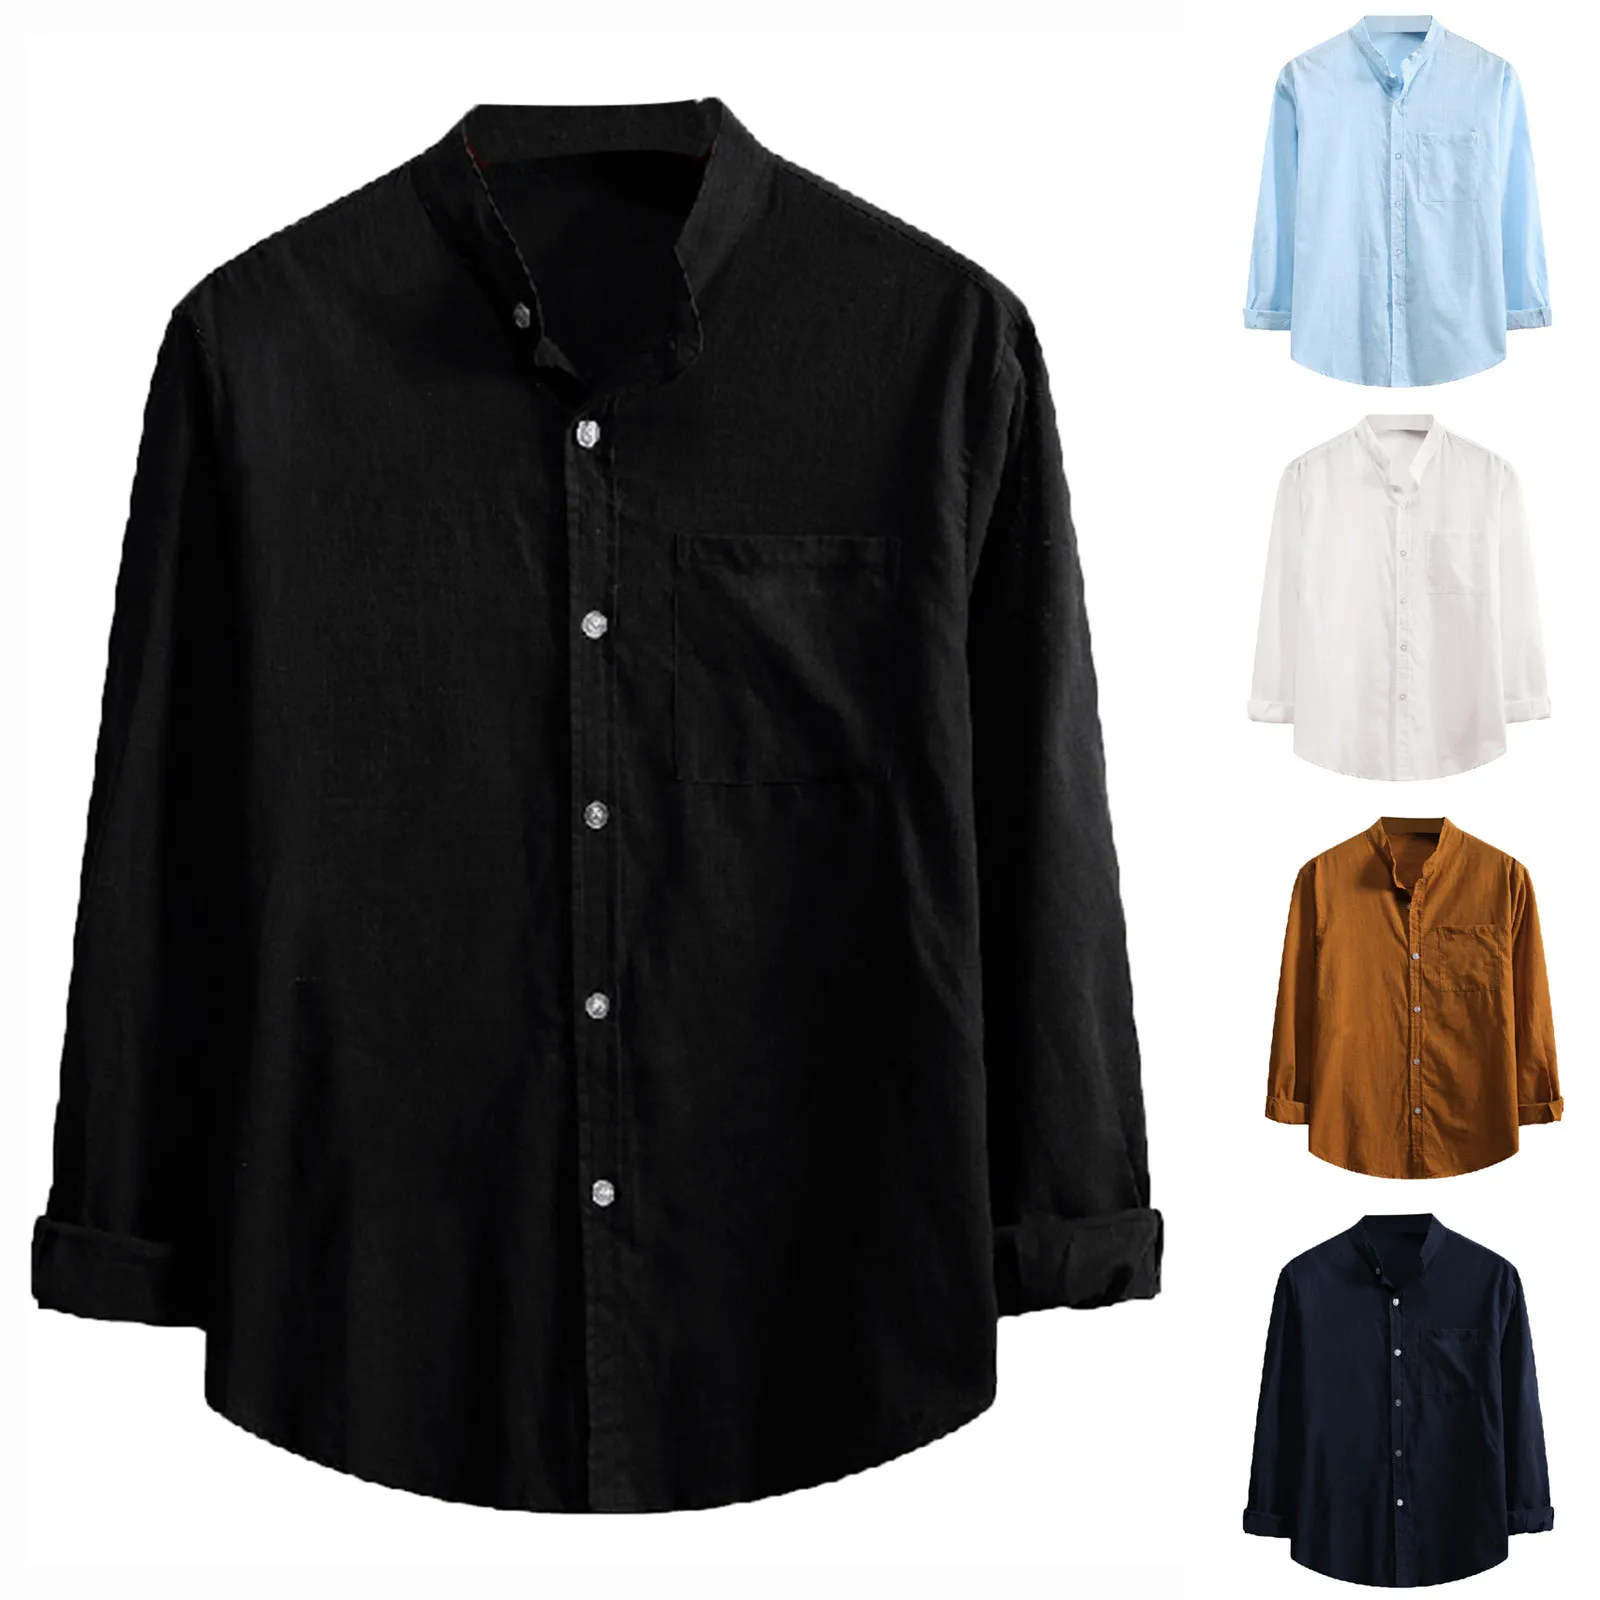 Men's Casual Solid Color Lapel Striped Long-sleeved Shirt Top Blouse Oversized Hawaiian Shirt